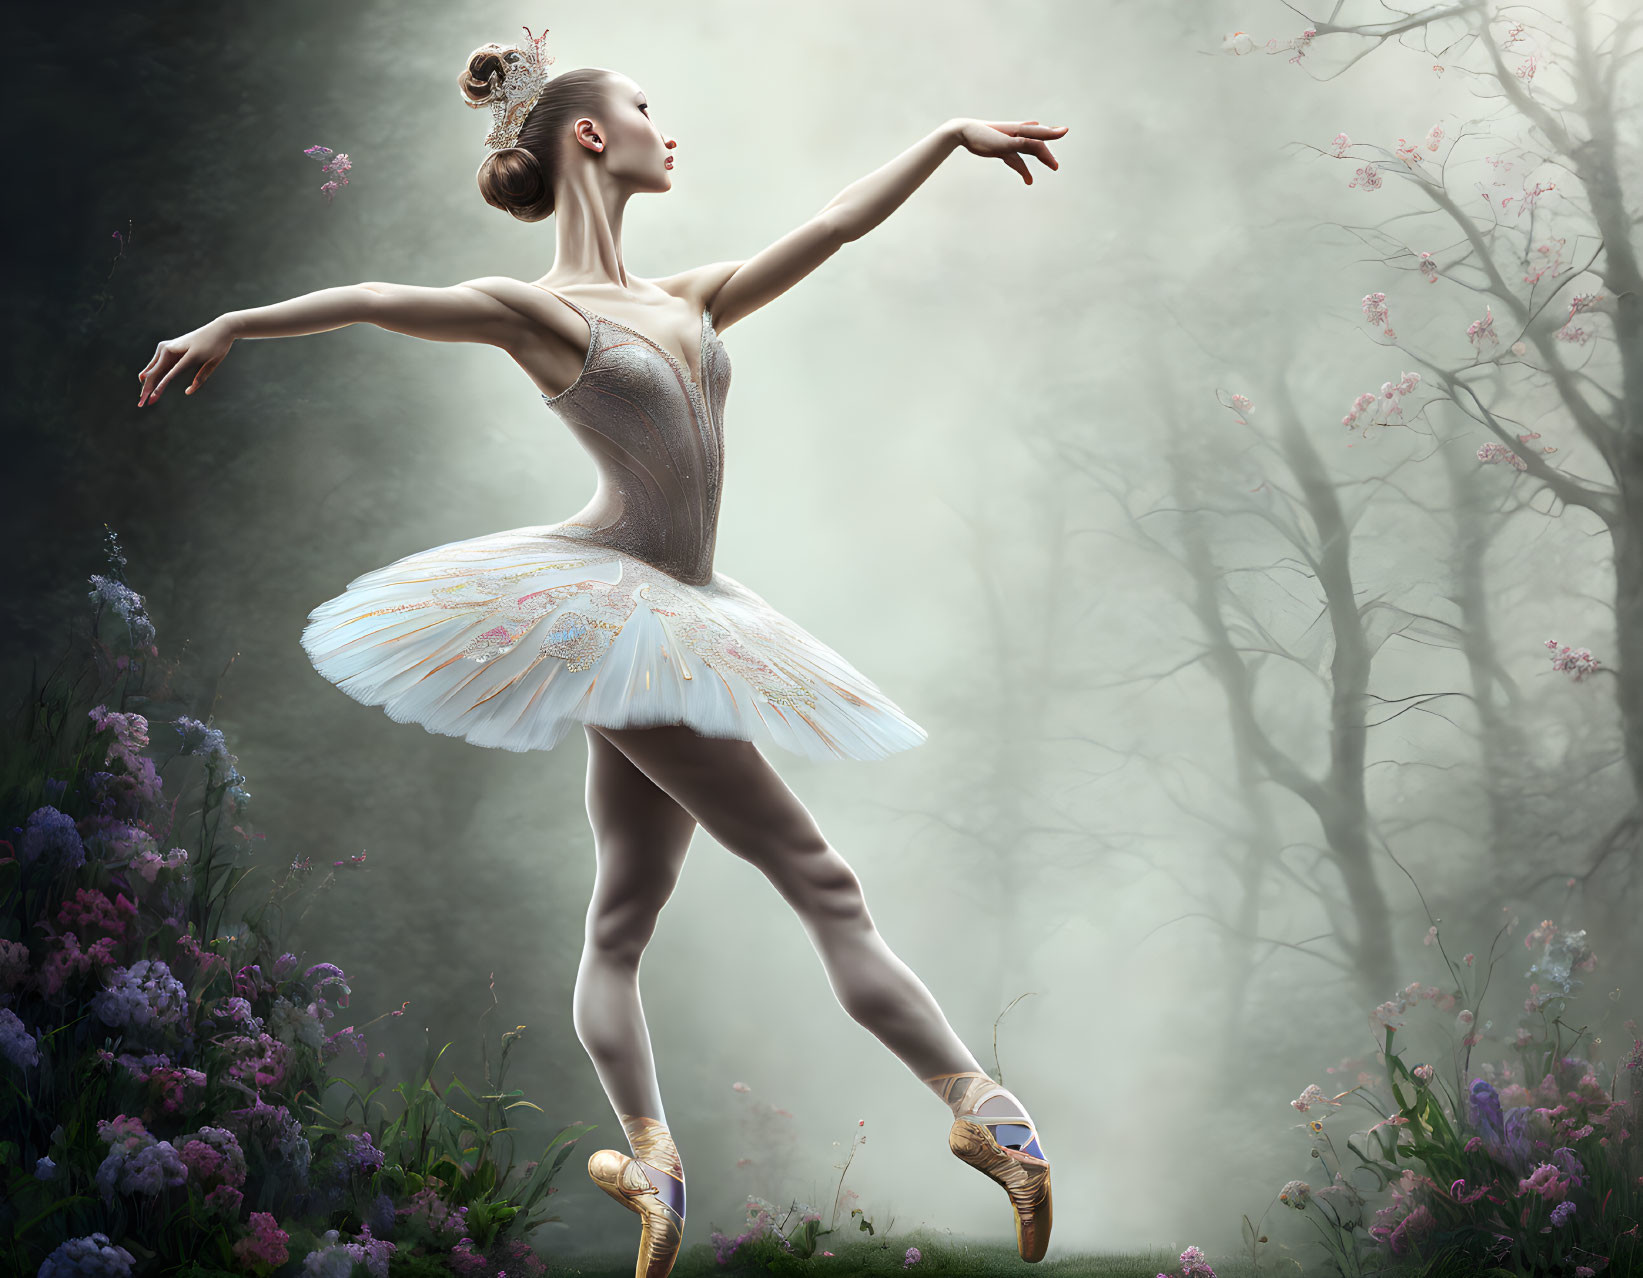 Ballerina in Sparkling Tutu and Pointe Shoes Amid Misty Flower Setting